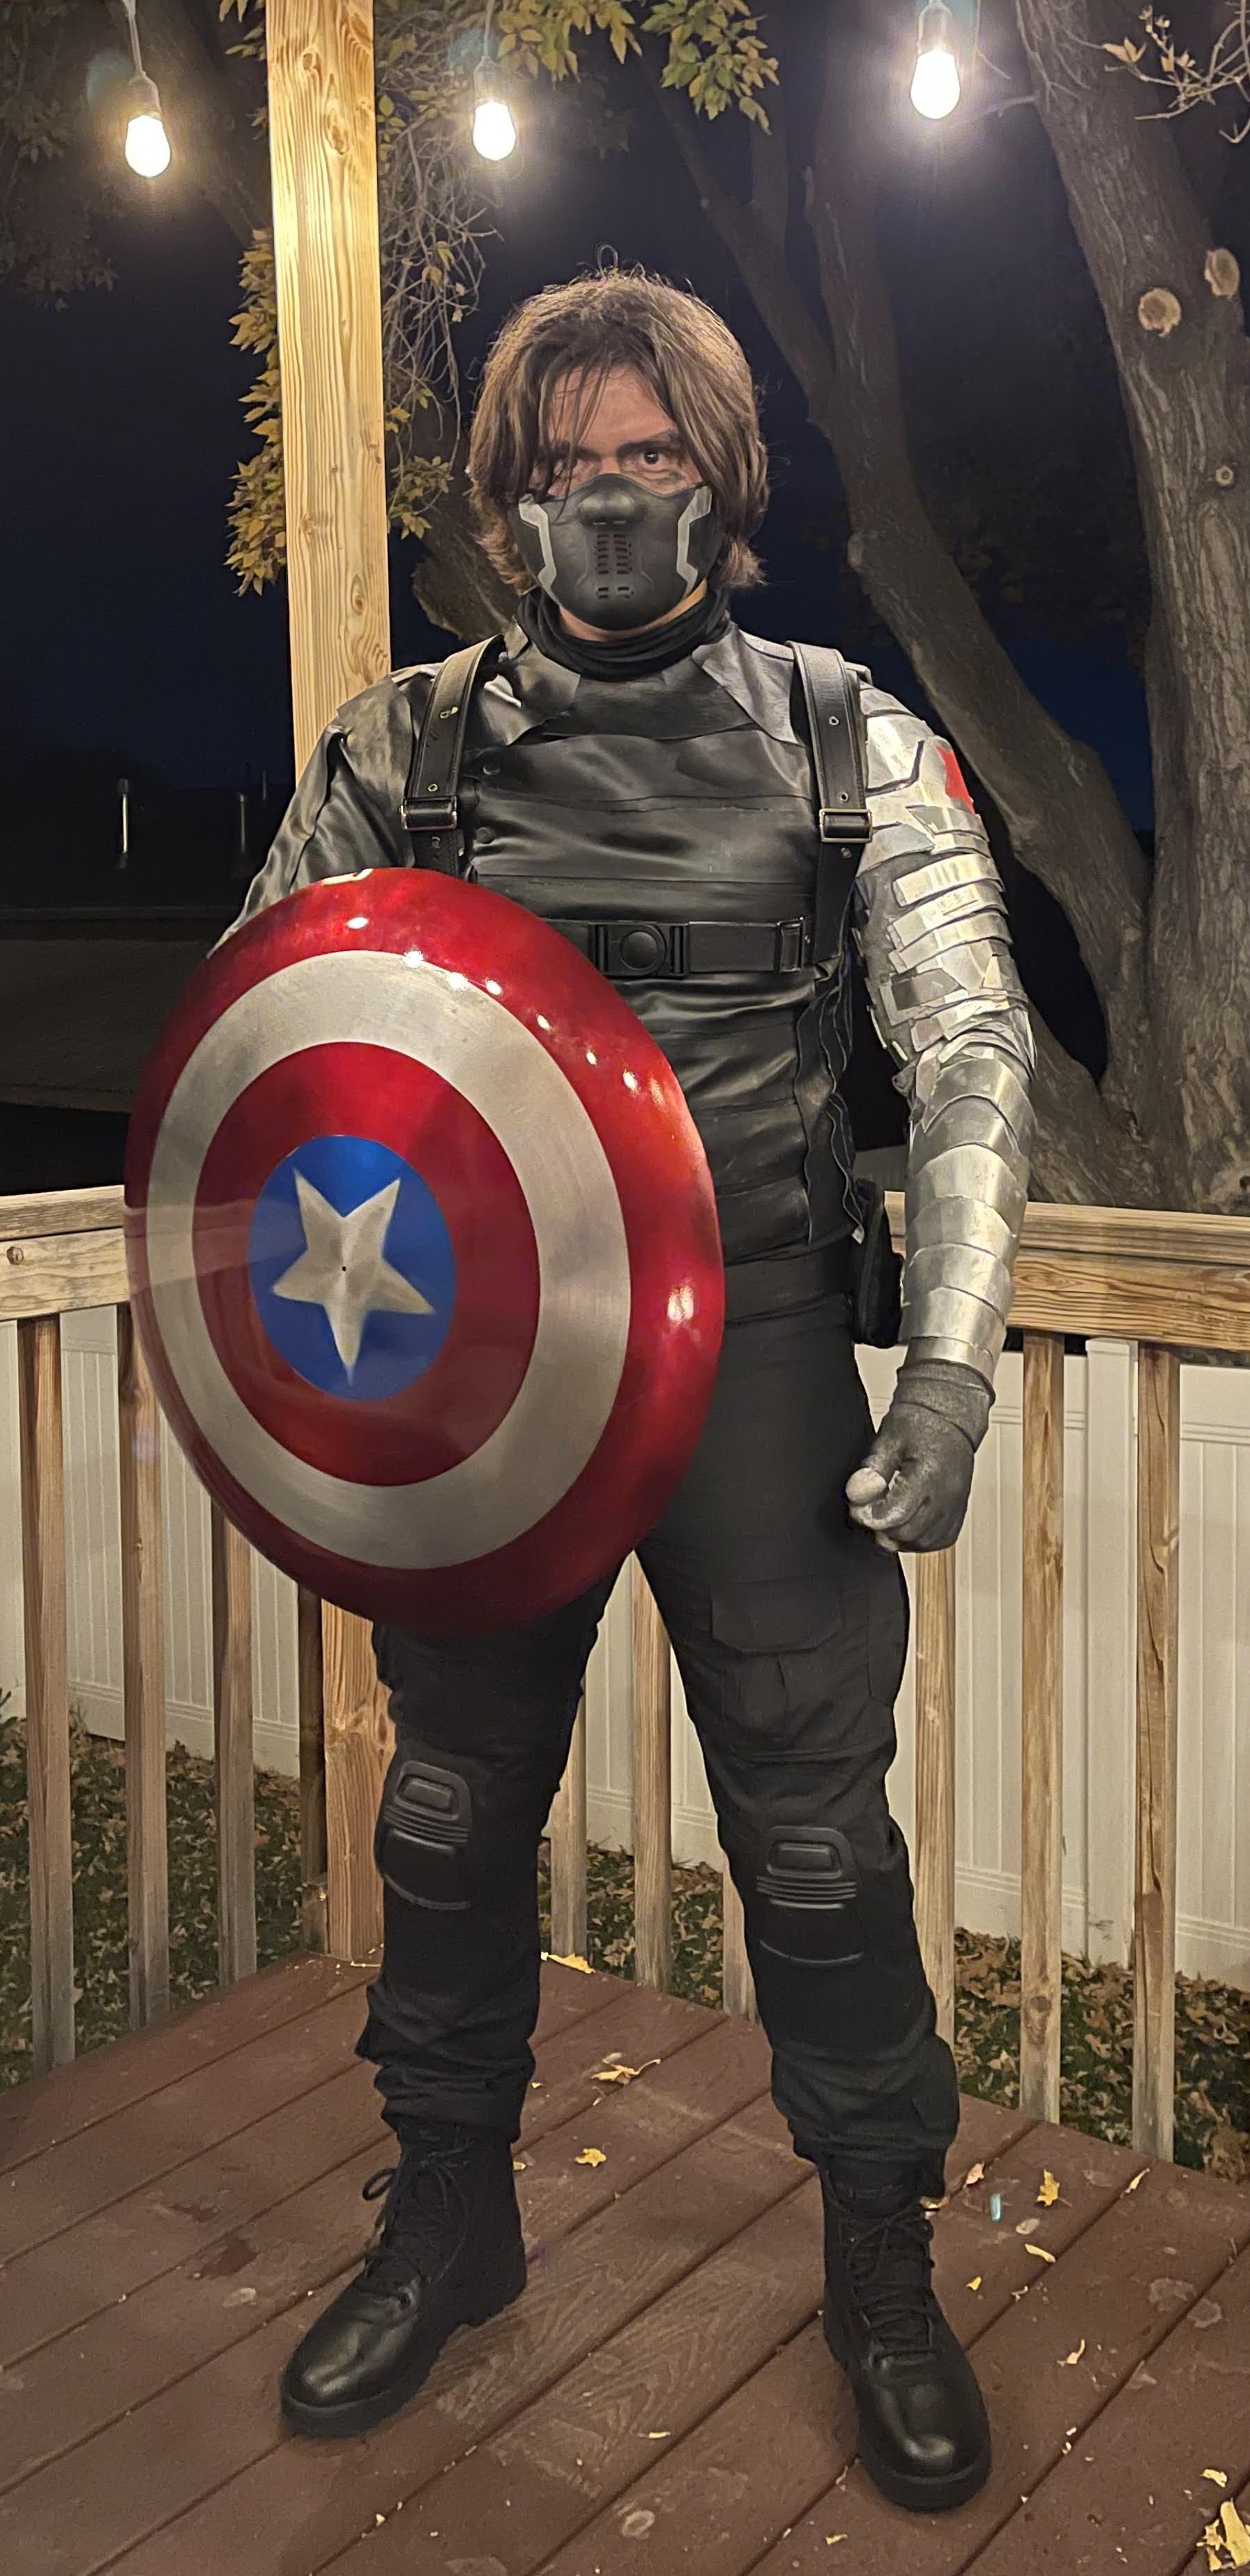 Stephen Dressed as the Winter Soldier holding Captain America's shield